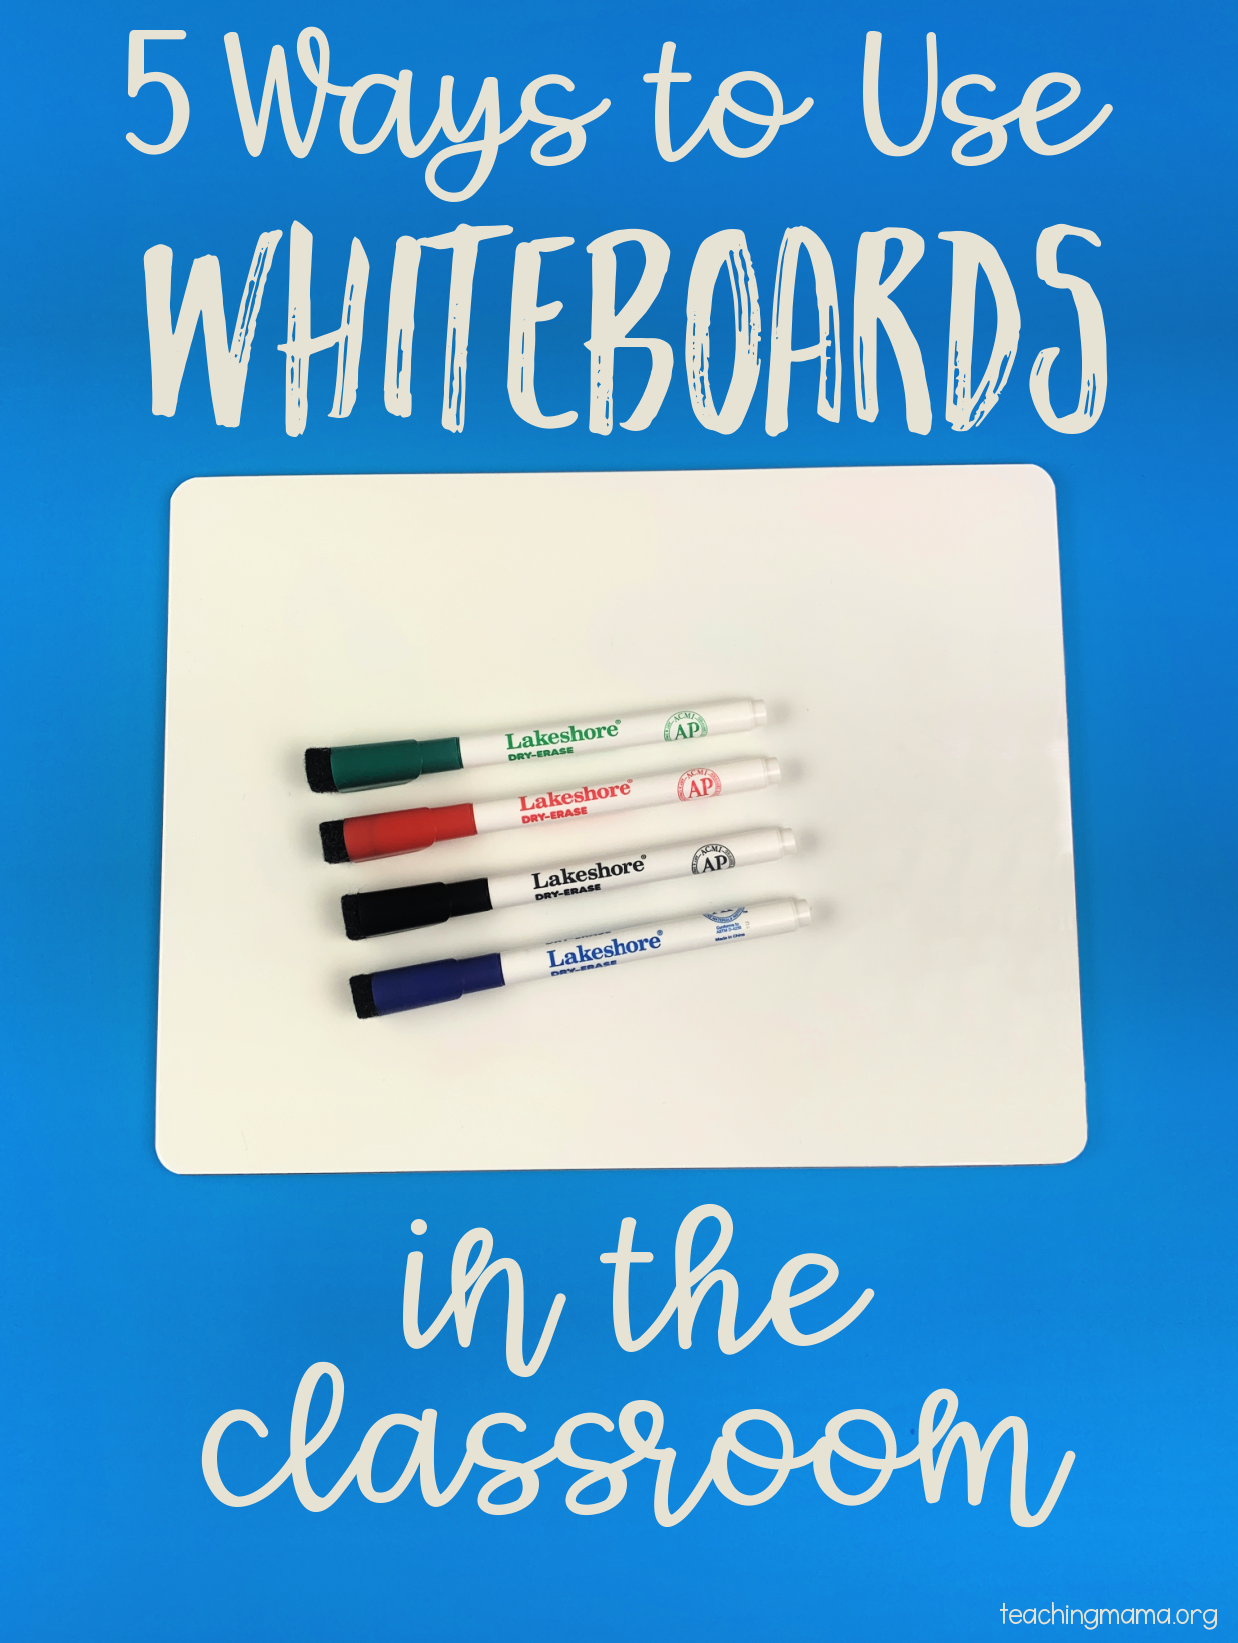 https://teachingmama.org/wp-content/uploads/2022/09/5-ways-to-use-whiteboards.png